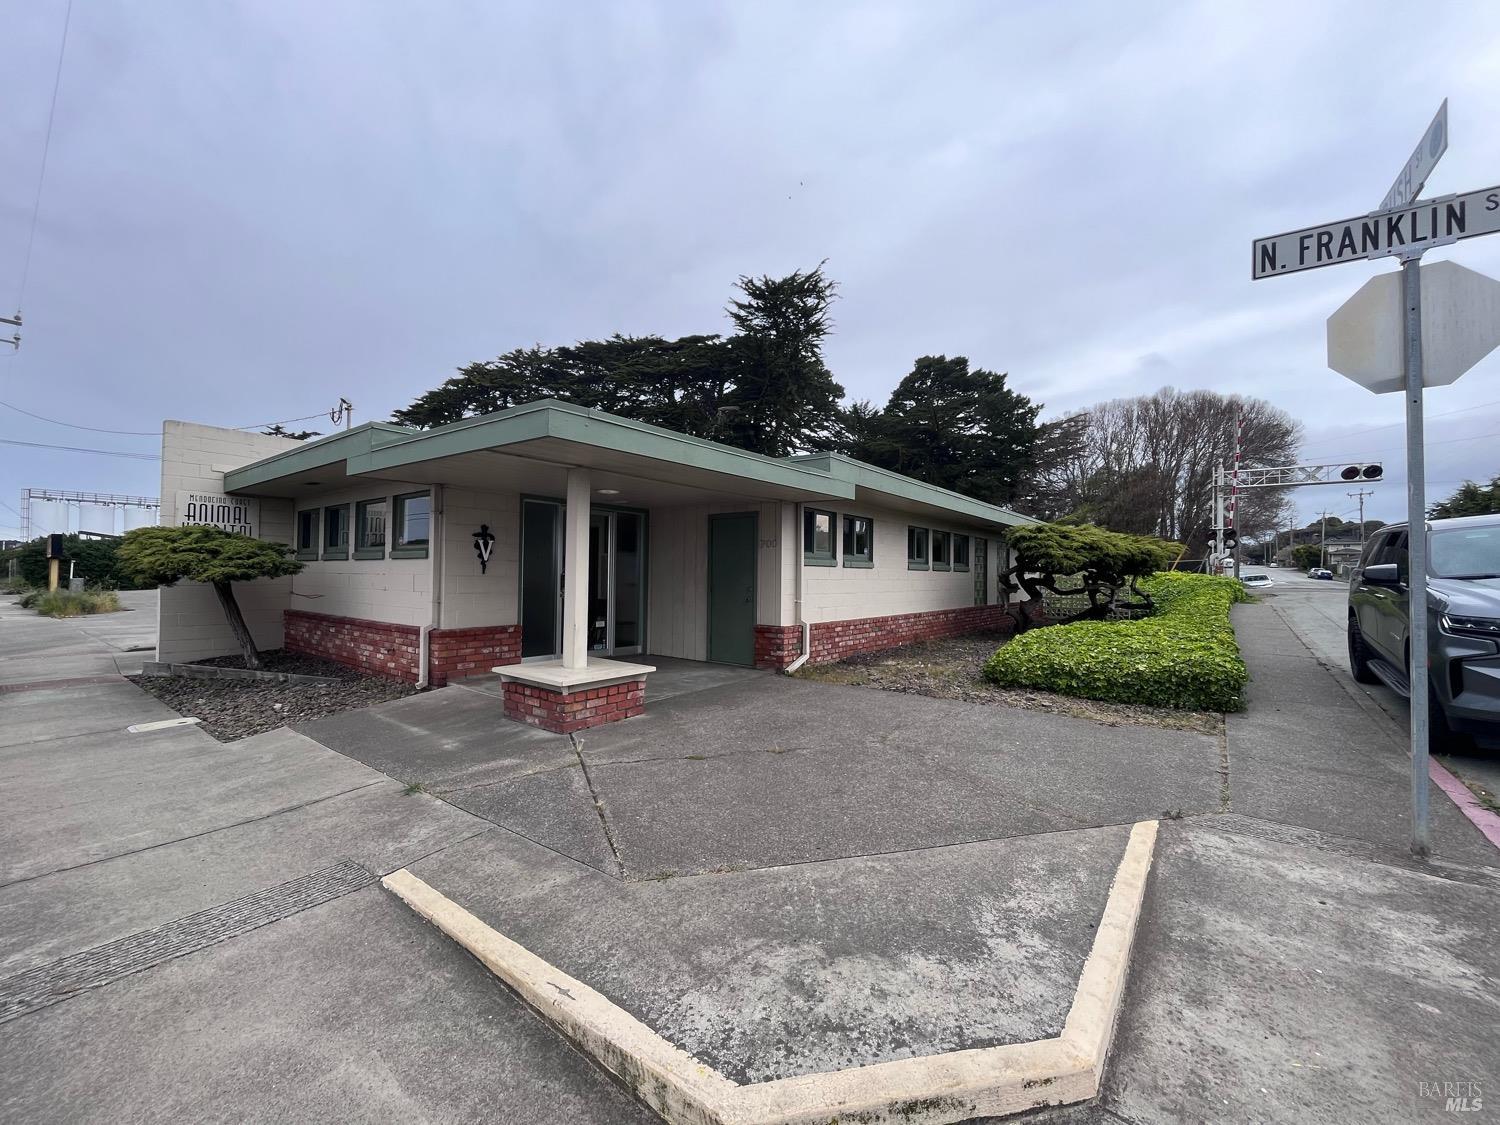 Photo of 700 Franklin St in Fort Bragg, CA